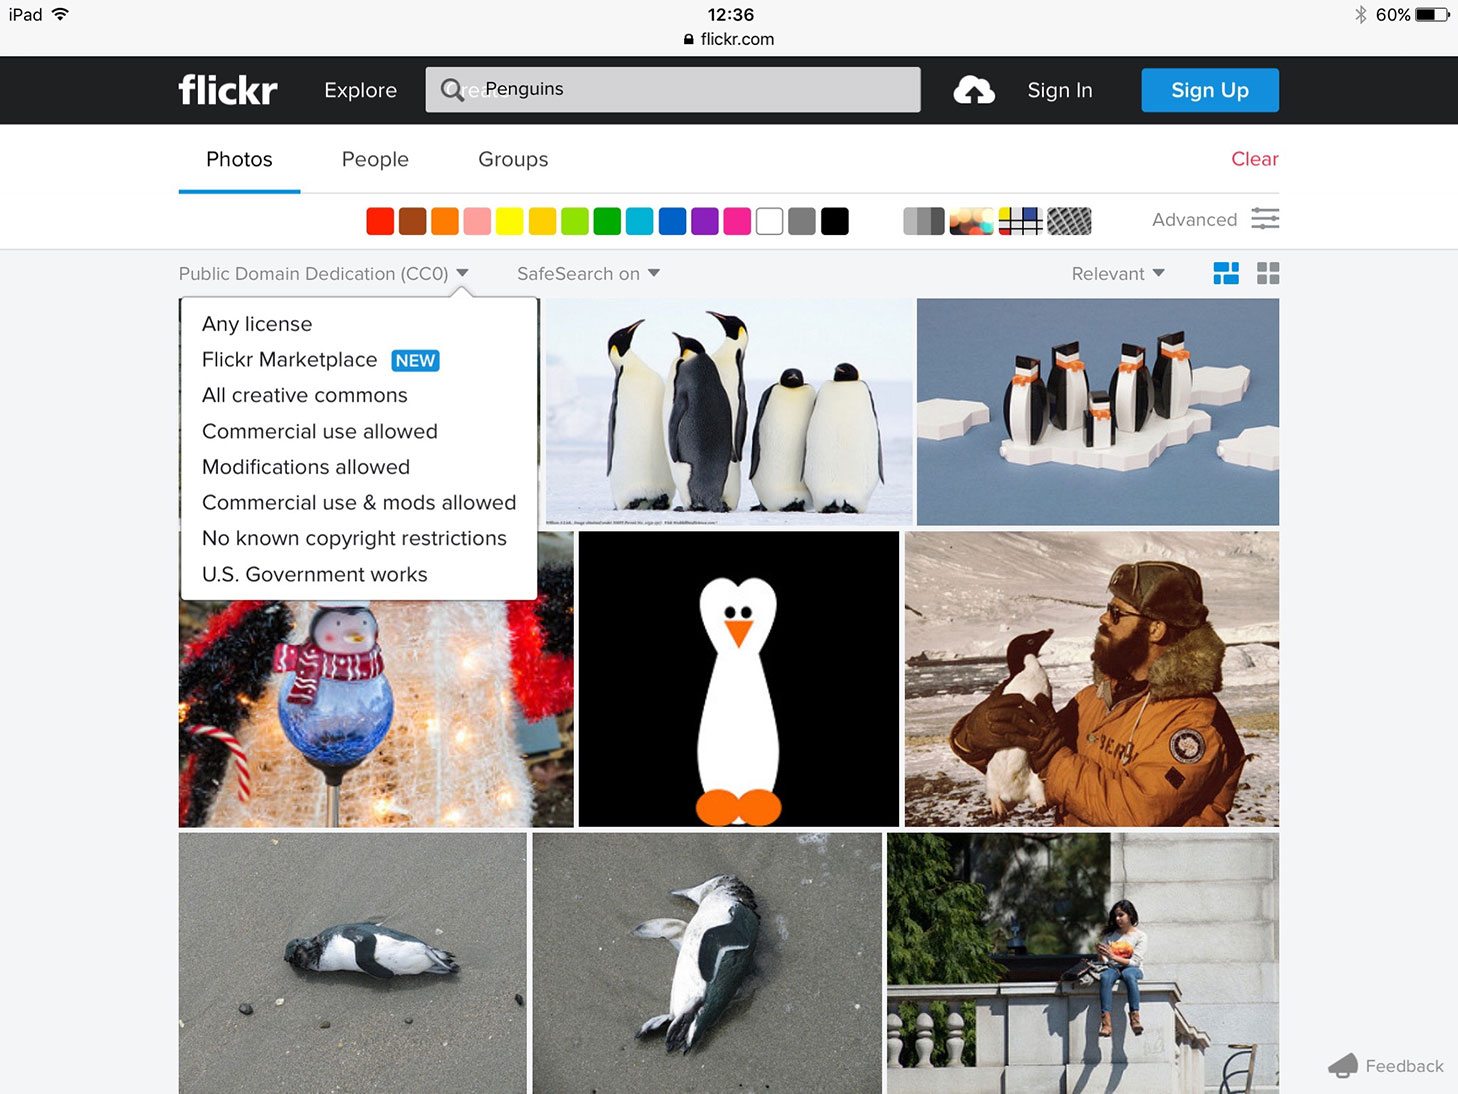 Doing a search for penguins on Flickr